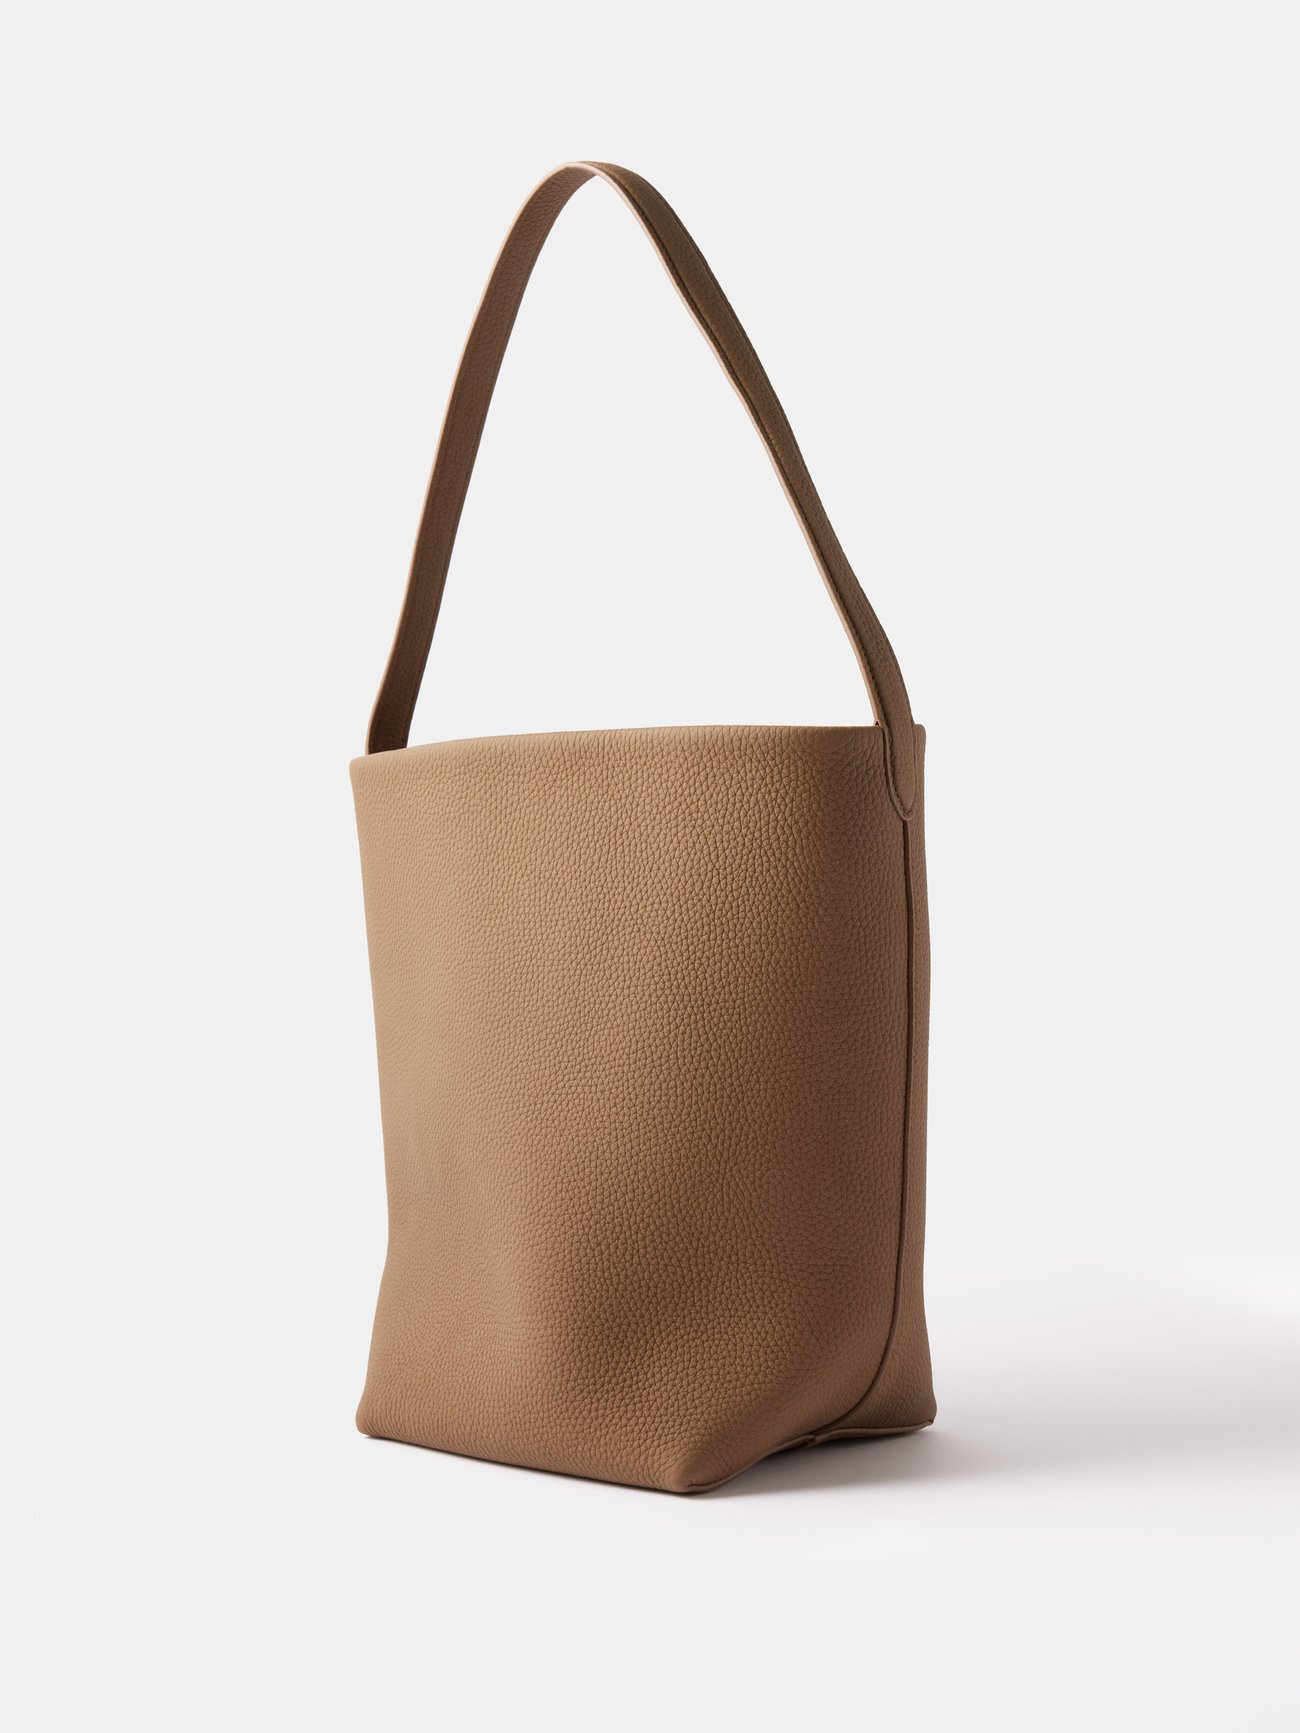 Park Three Leather Tote Bag in Brown - The Row